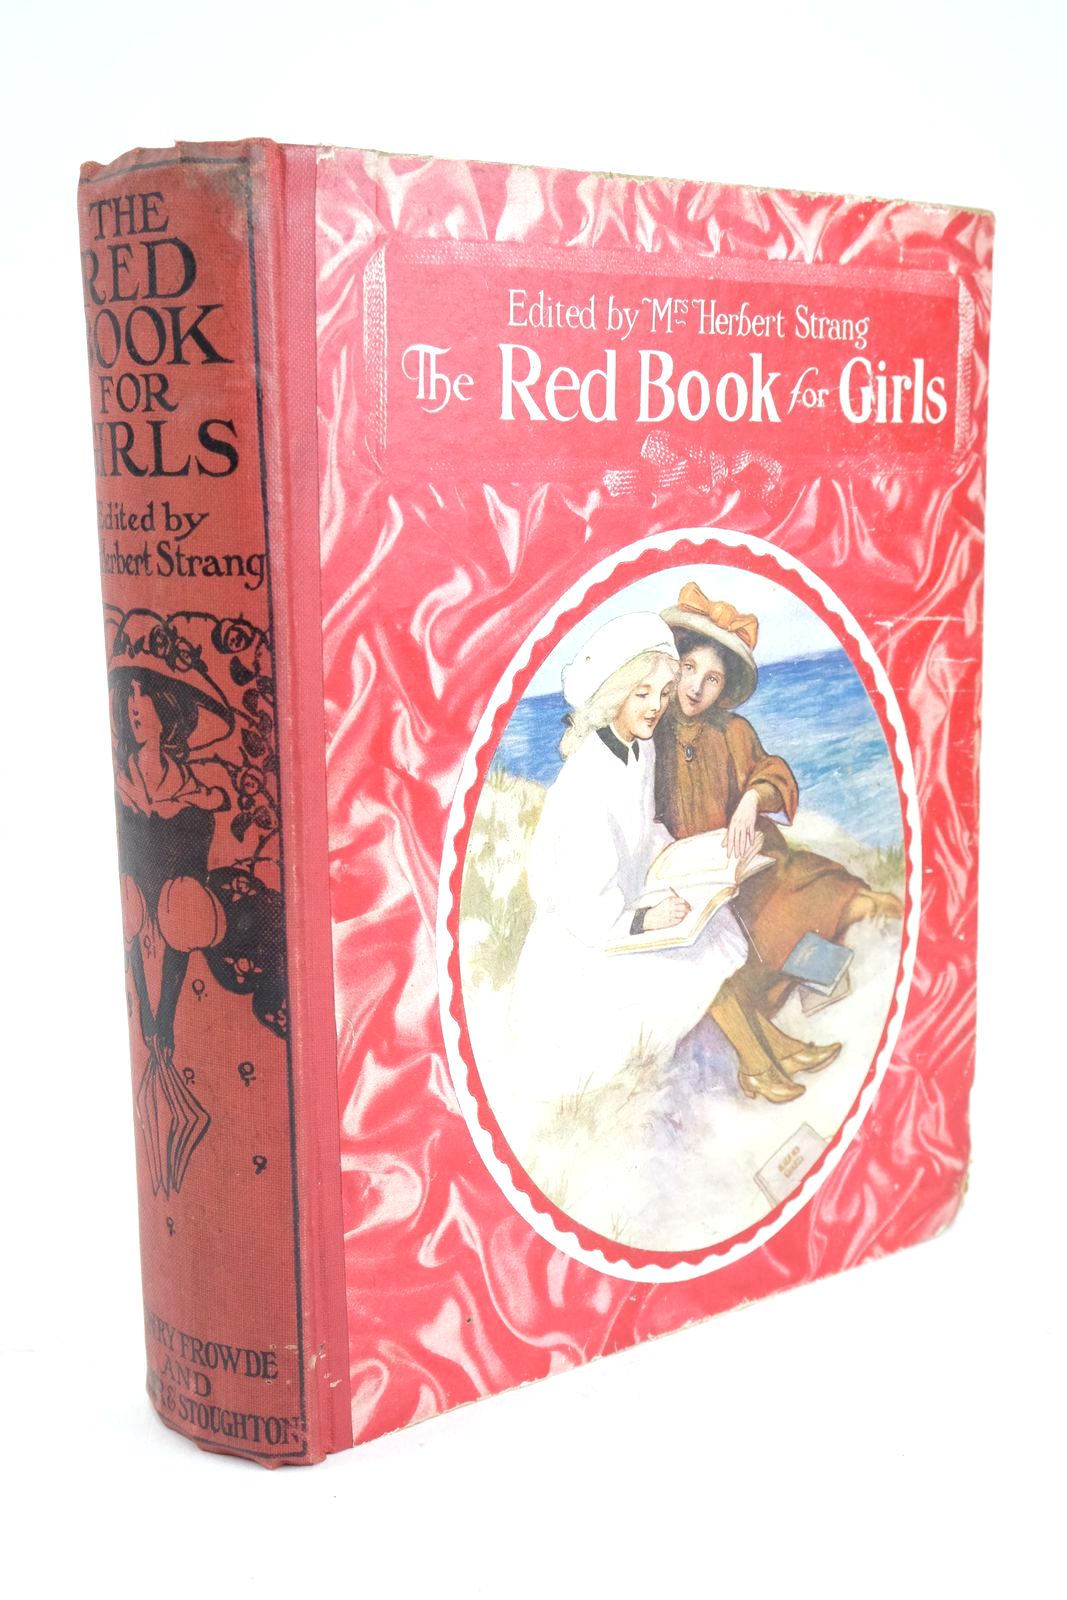 Photo of THE RED BOOK FOR GIRLS written by Strang, Mrs. Herbert Clarke, Mary Cowden Marchant, Bessie Brazil, Angela Bruce, Dorita Fairlie et al,  illustrated by Govey, Lilian A. Earnshaw, Harold C. Price, N.M. Pears, Chas. et al.,  published by Hodder &amp; Stoughton, Henry Frowde (STOCK CODE: 1325454)  for sale by Stella & Rose's Books